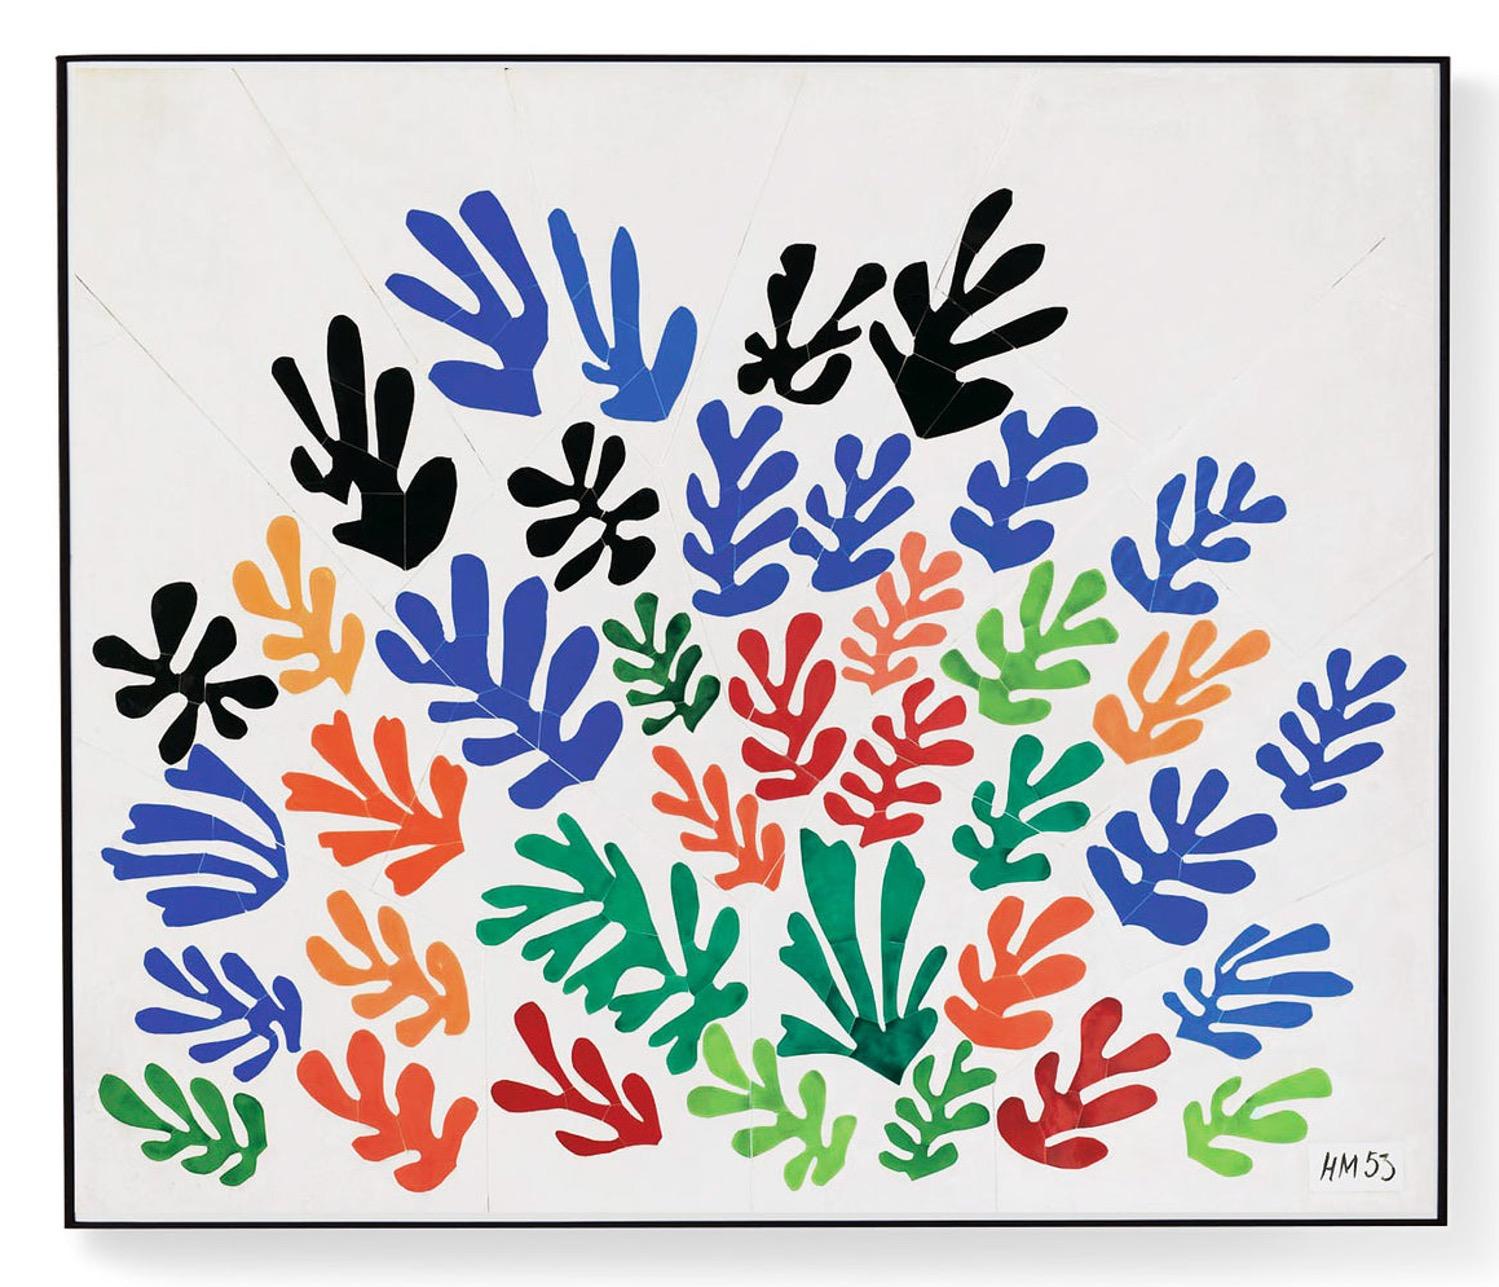 This print features a reproduction of La Gerbe (1953), by Henri Matisse, an artist whose work is renowned globally.  It's mounted and laminated for protection from dust and UV rays, and floated in a hand-stained black frame made from ash wood grown